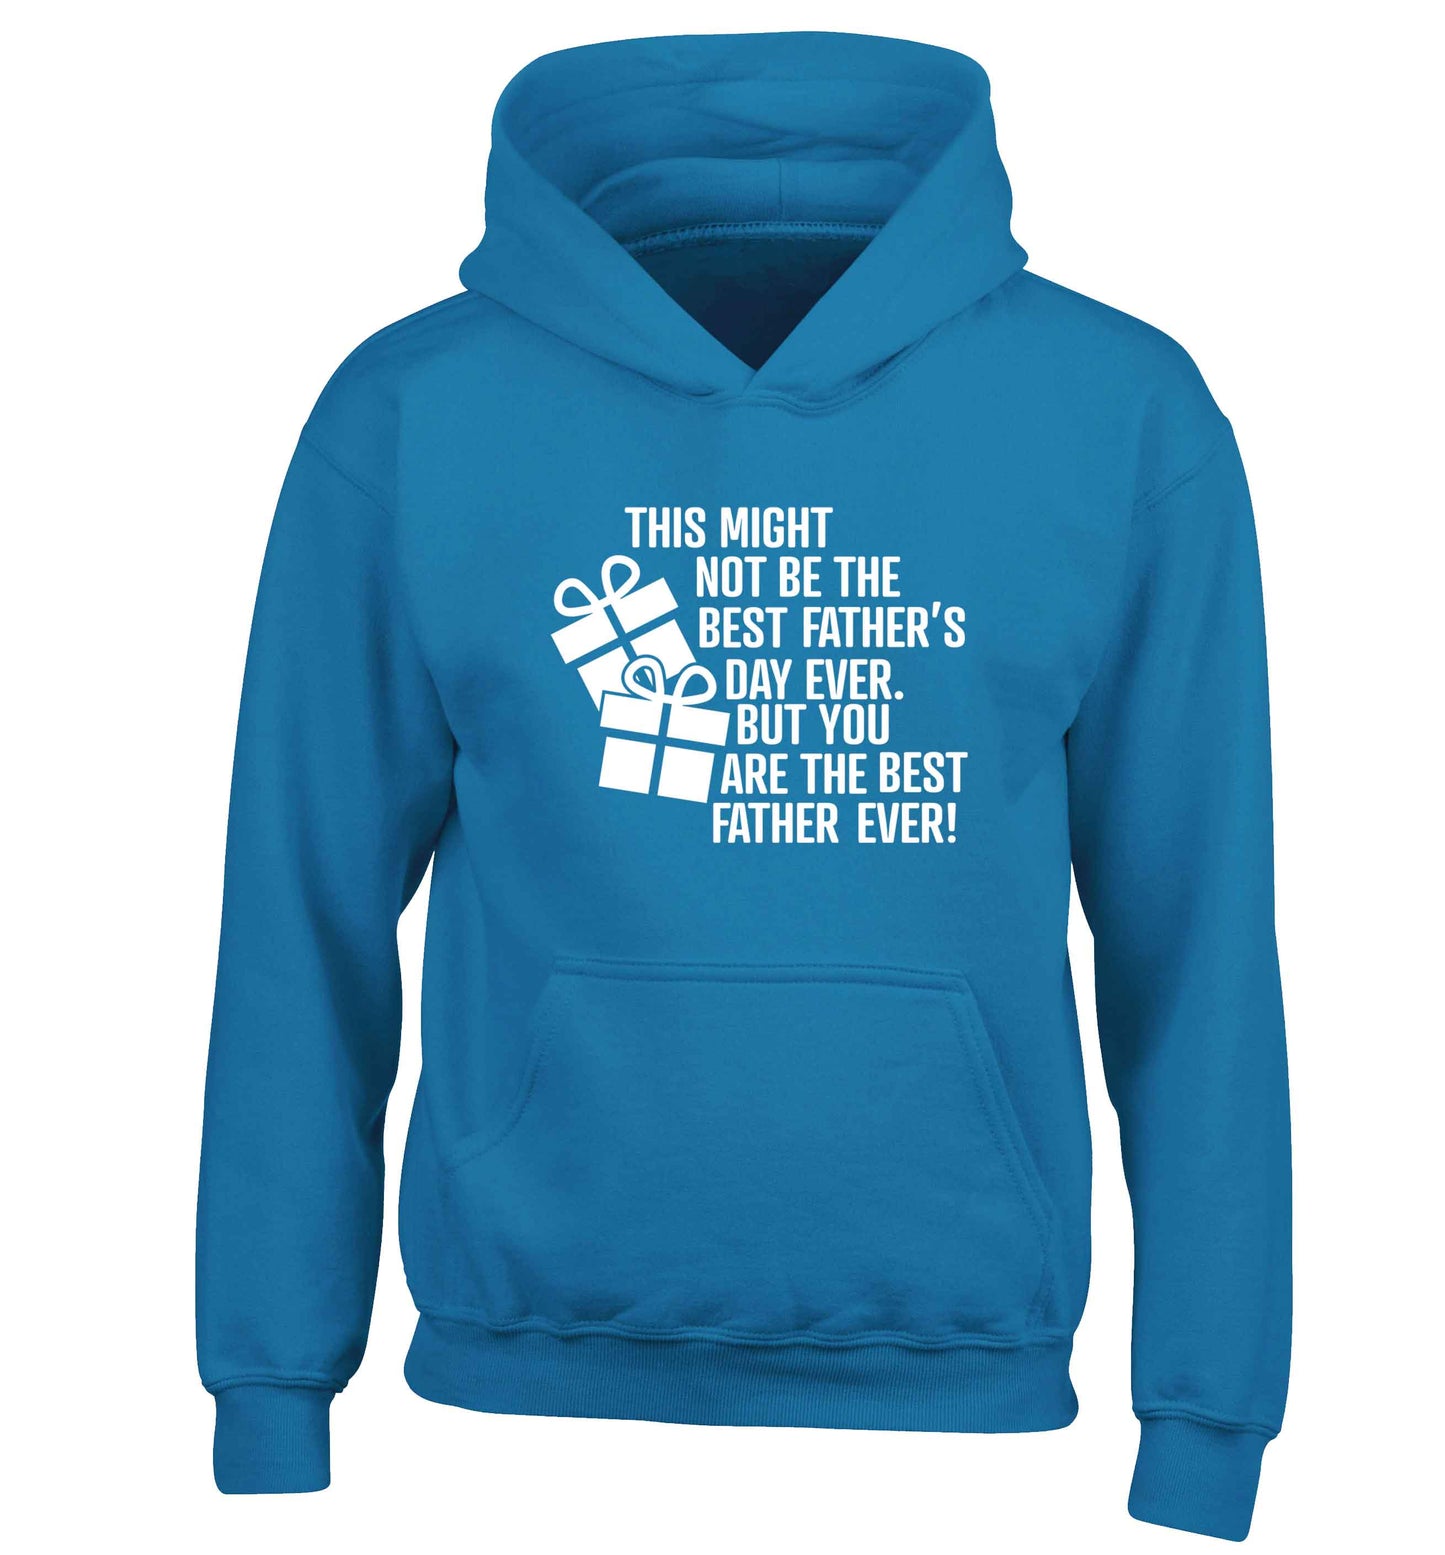 It might not be the best Father's Day ever but you are the best father ever! children's blue hoodie 12-13 Years